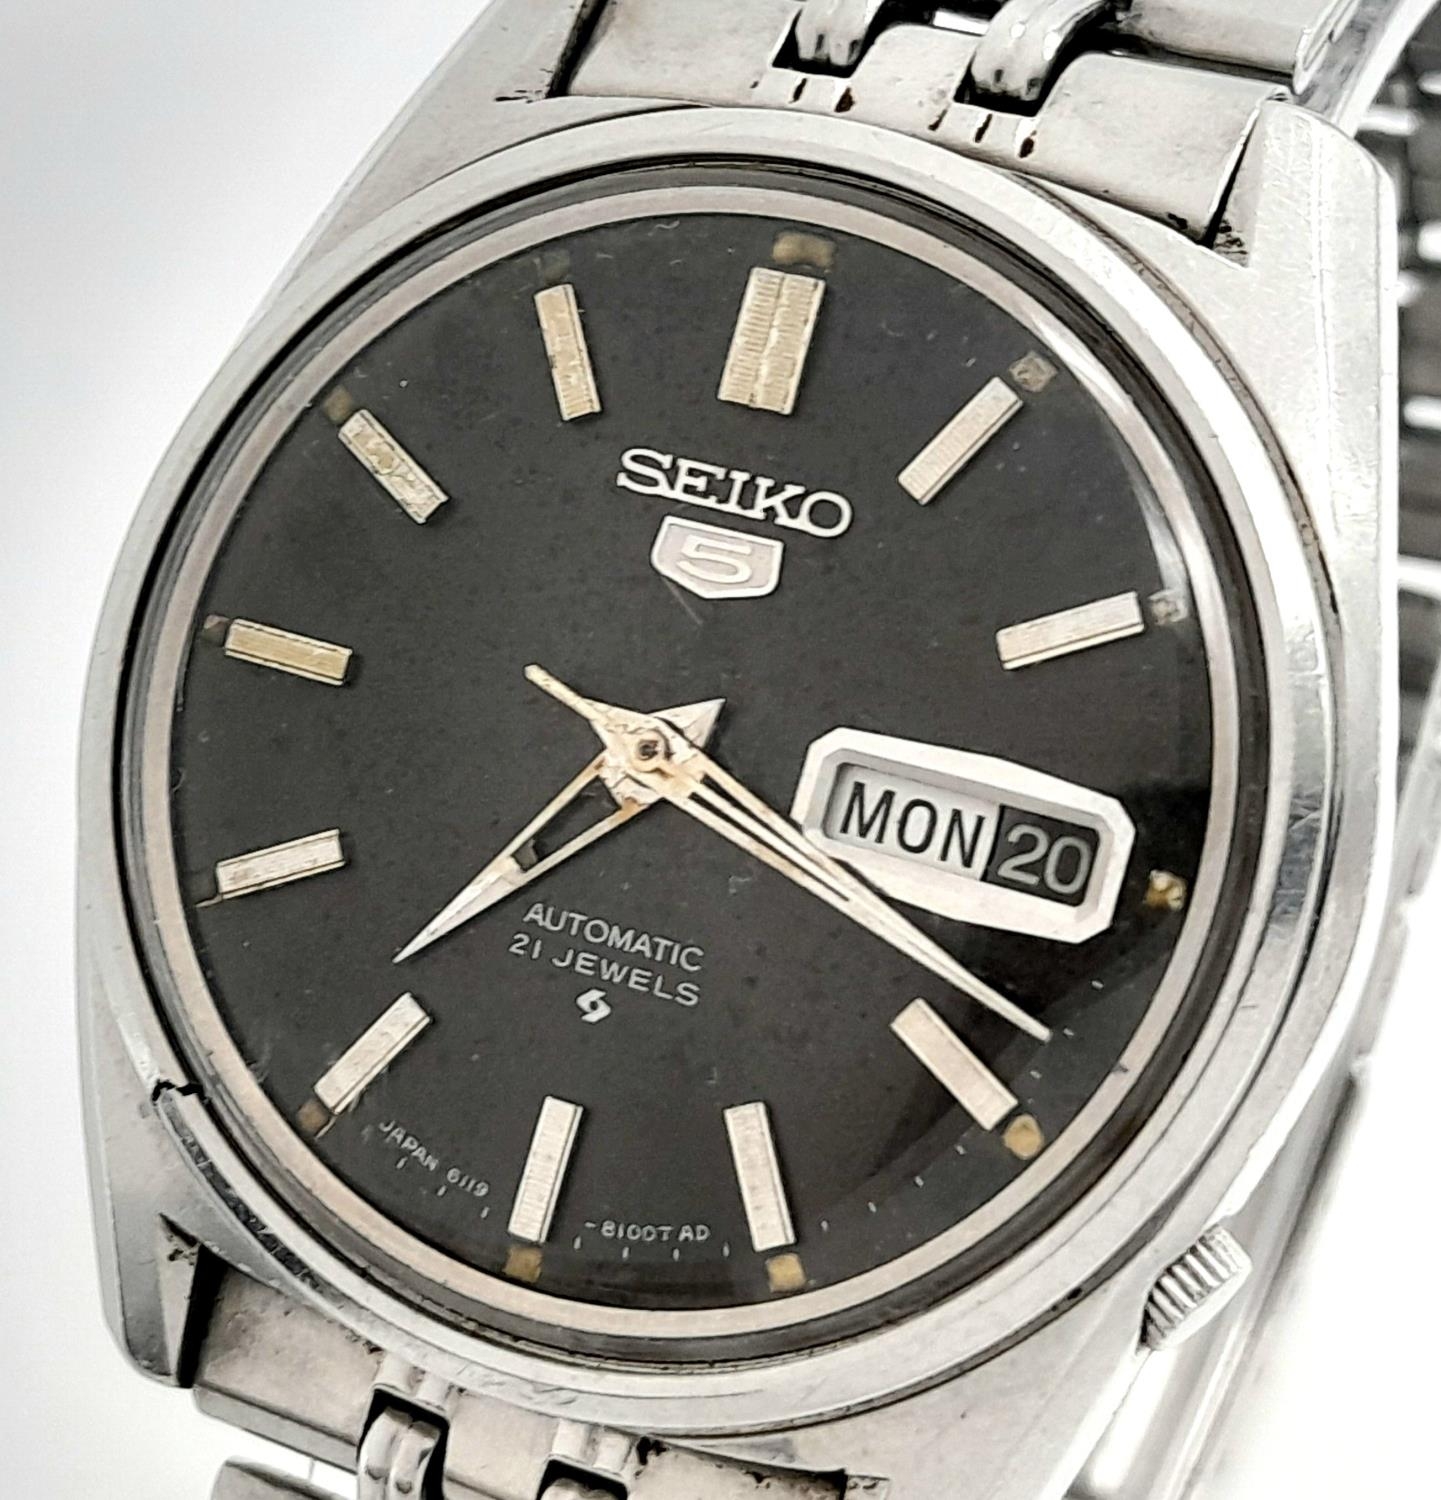 A Vintage Seiko 5 Automatic 21 Jewels Gents Watch. Stainless steel bracelet and case - 36mm. Black - Image 2 of 6